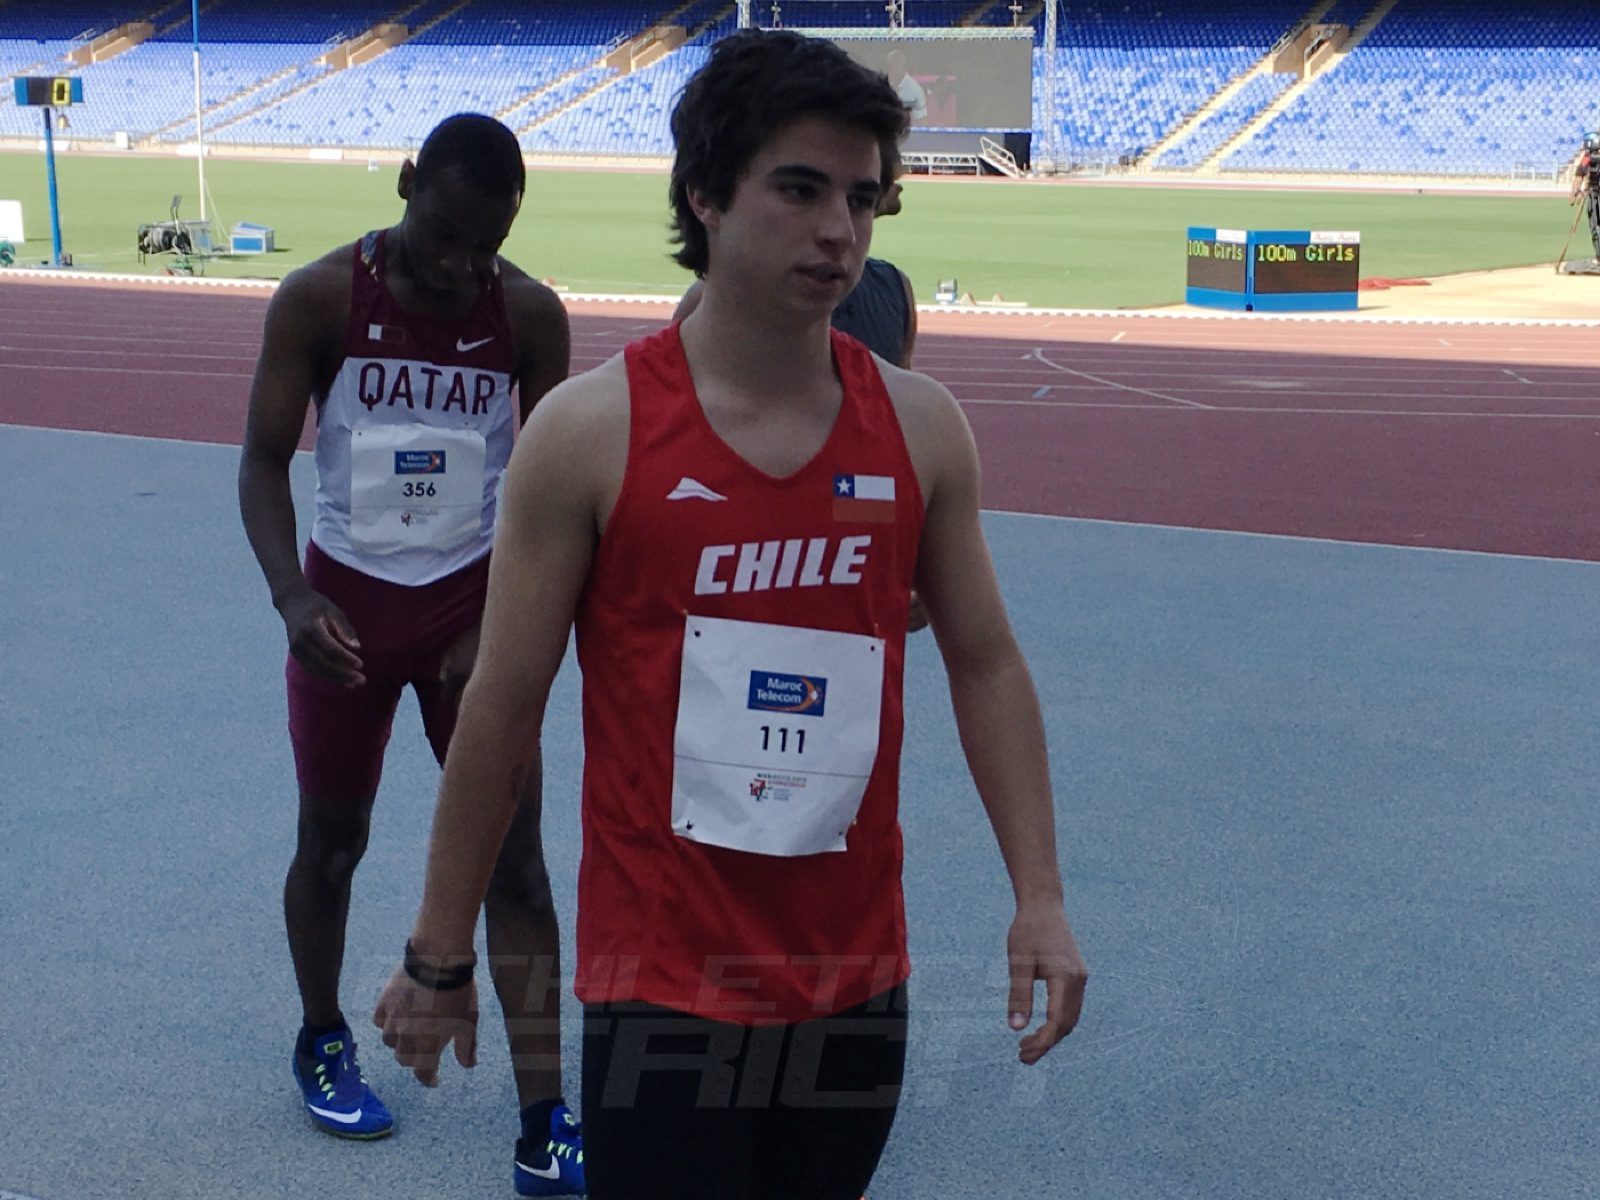 A Chilean Athlete after running in the Boys 100m preliminaries at the Gymnasiade 2018 in Marrakech / Photo Credit: Yomi Omogbeja